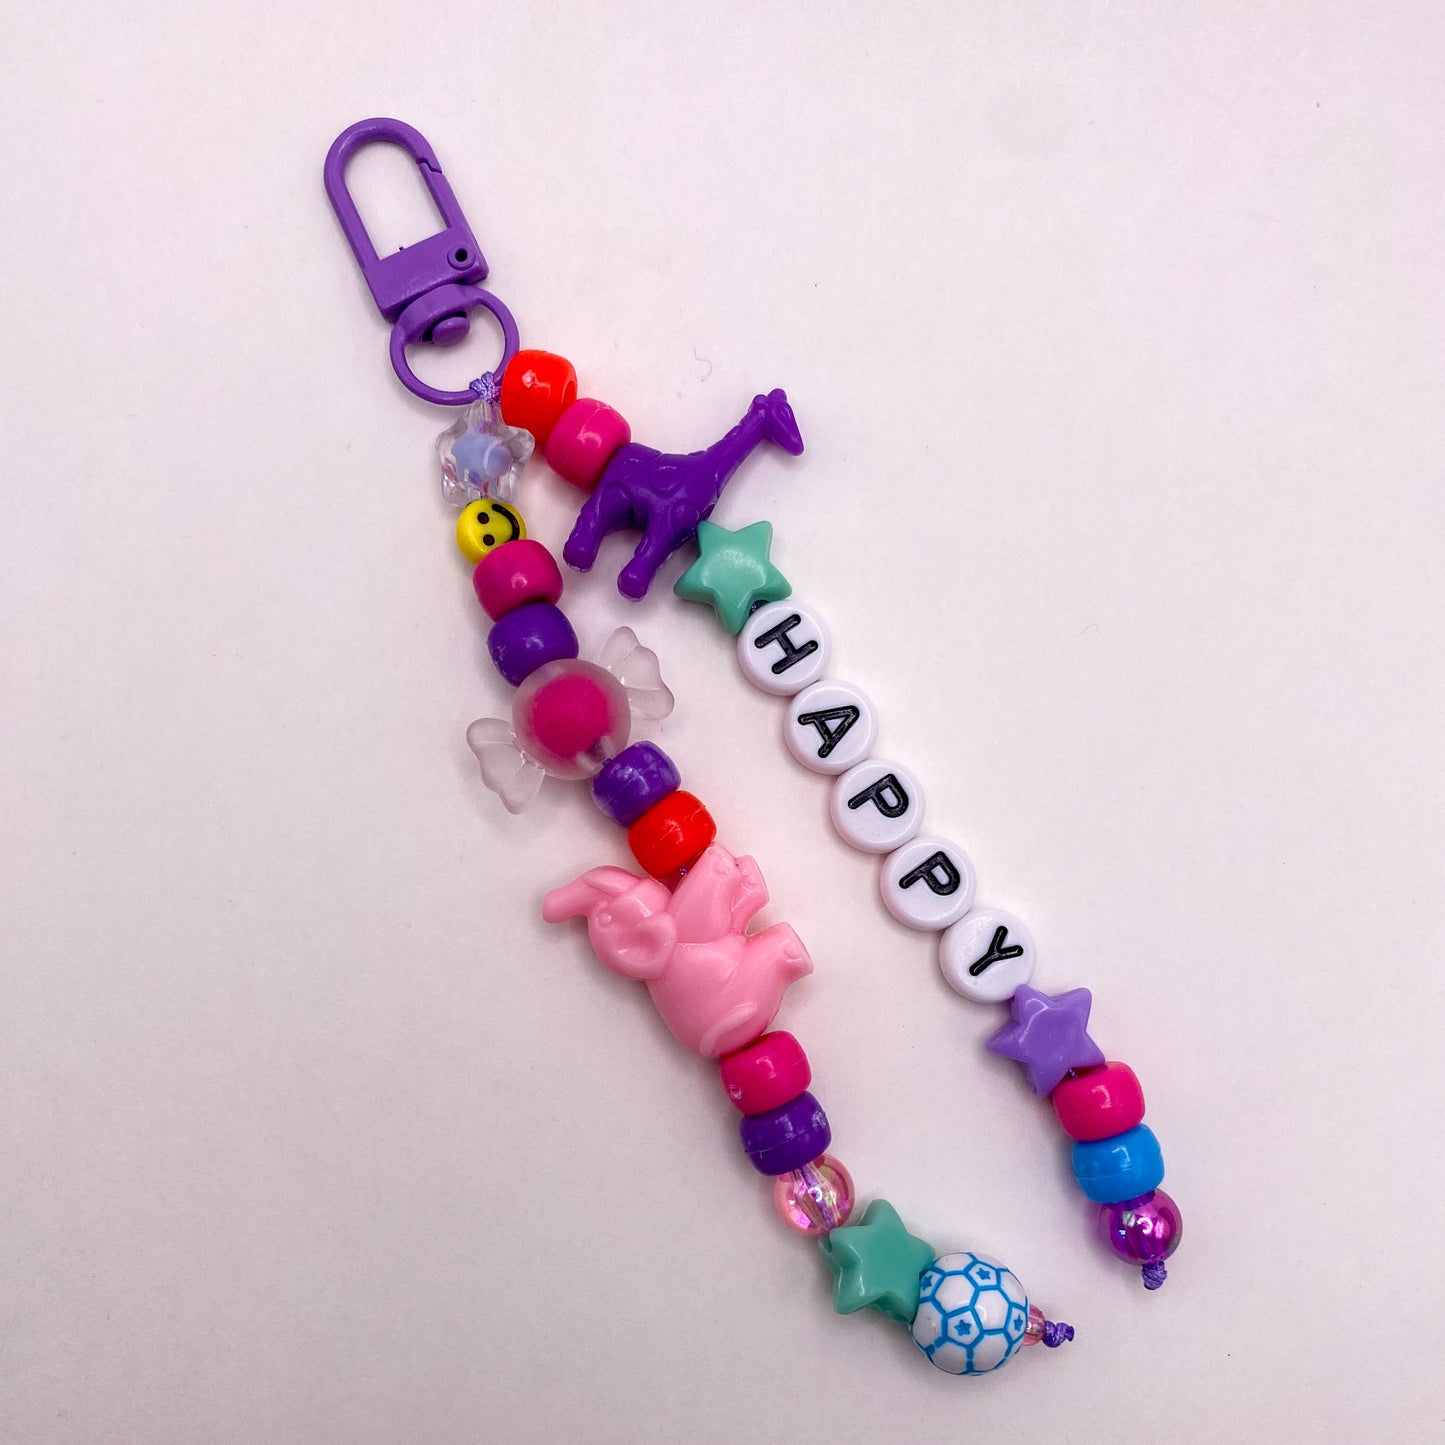 Personalised backpack pendant for kids